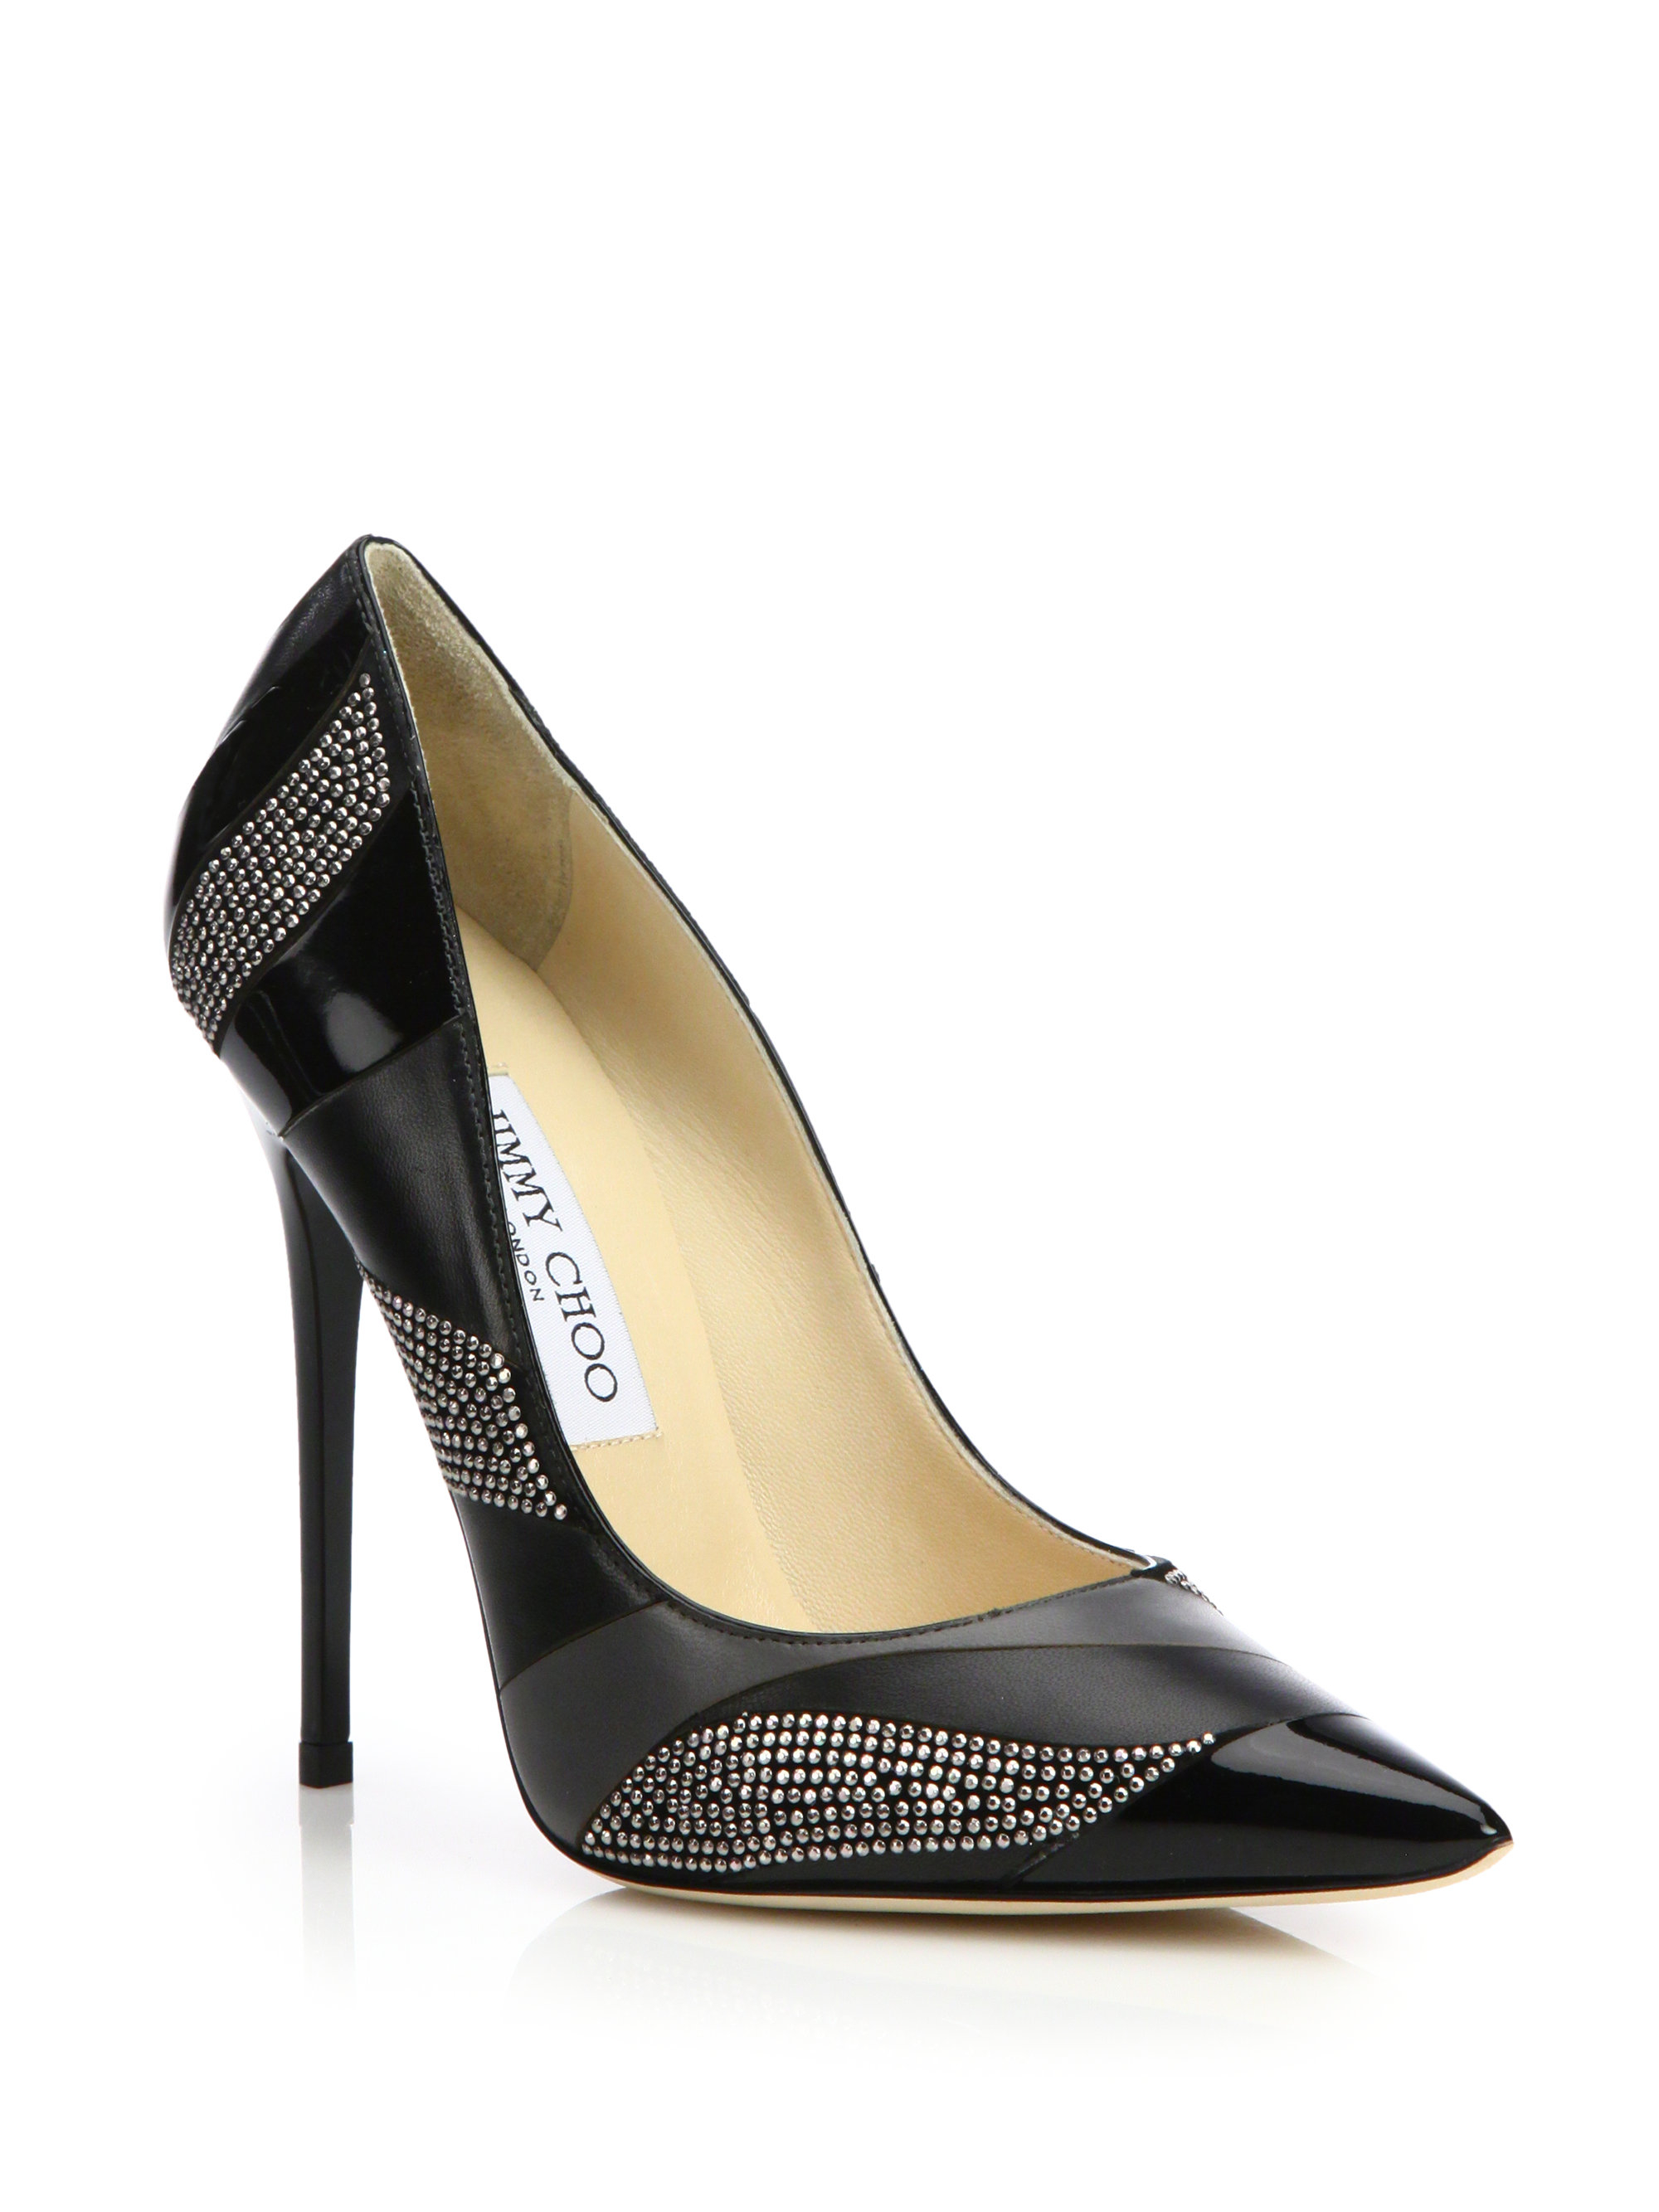 Jimmy choo Anouk Studded Patchwork Leather Pumps in Black | Lyst